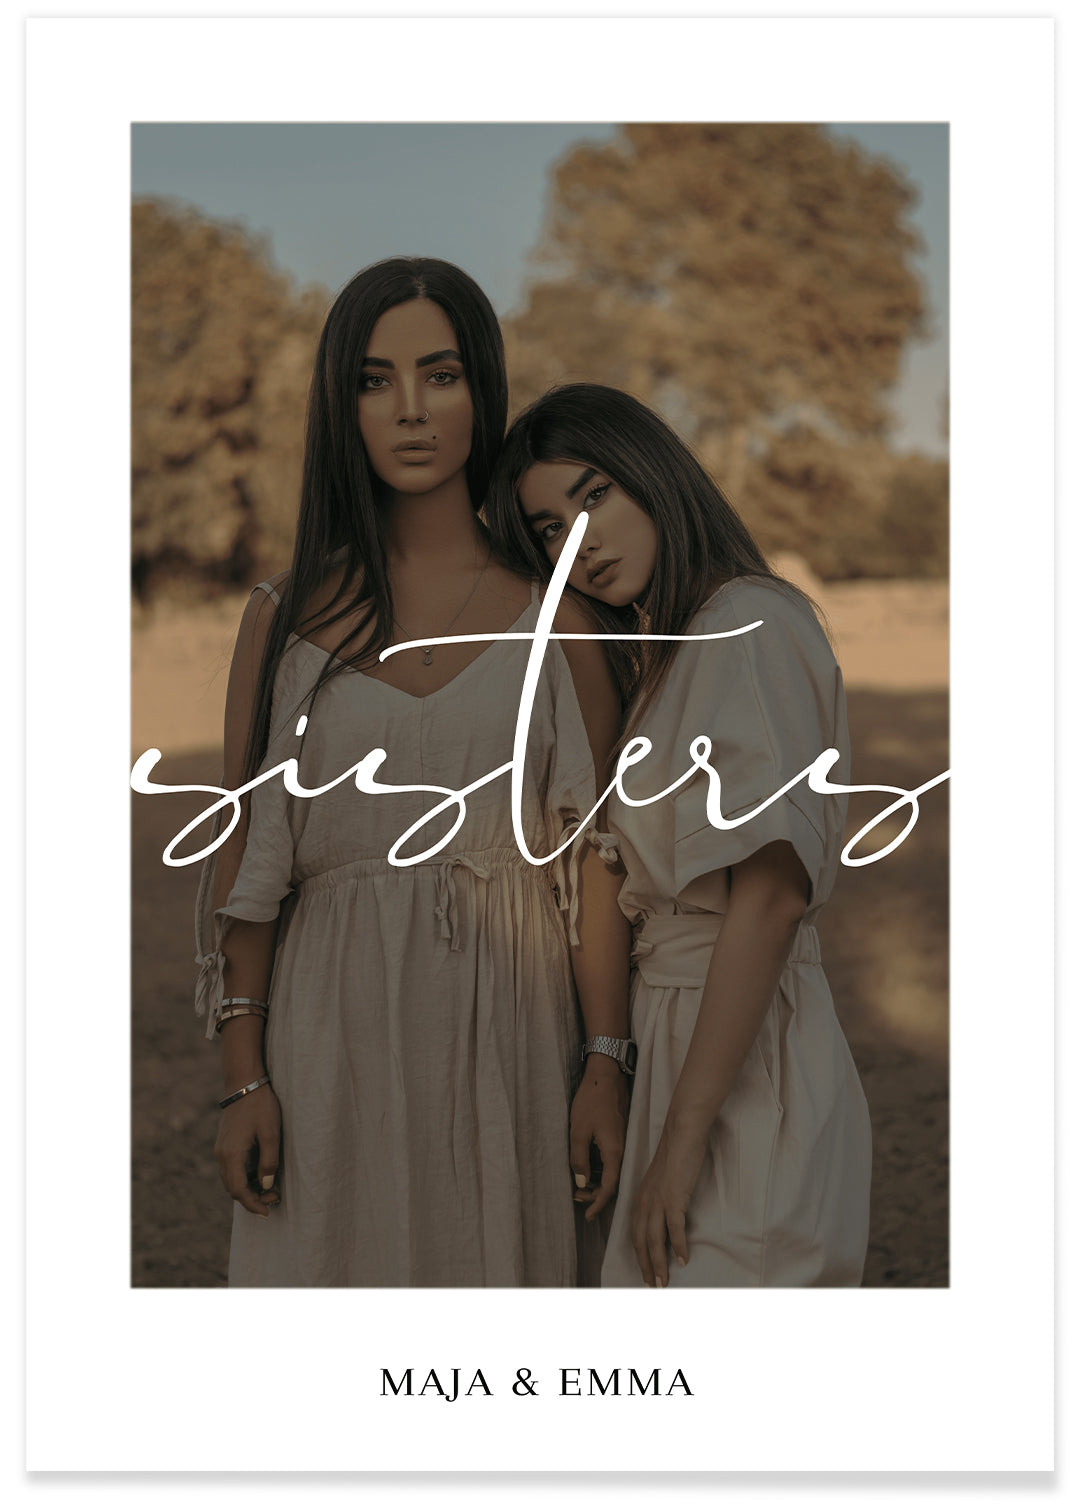 Fotoposter "Sisters"